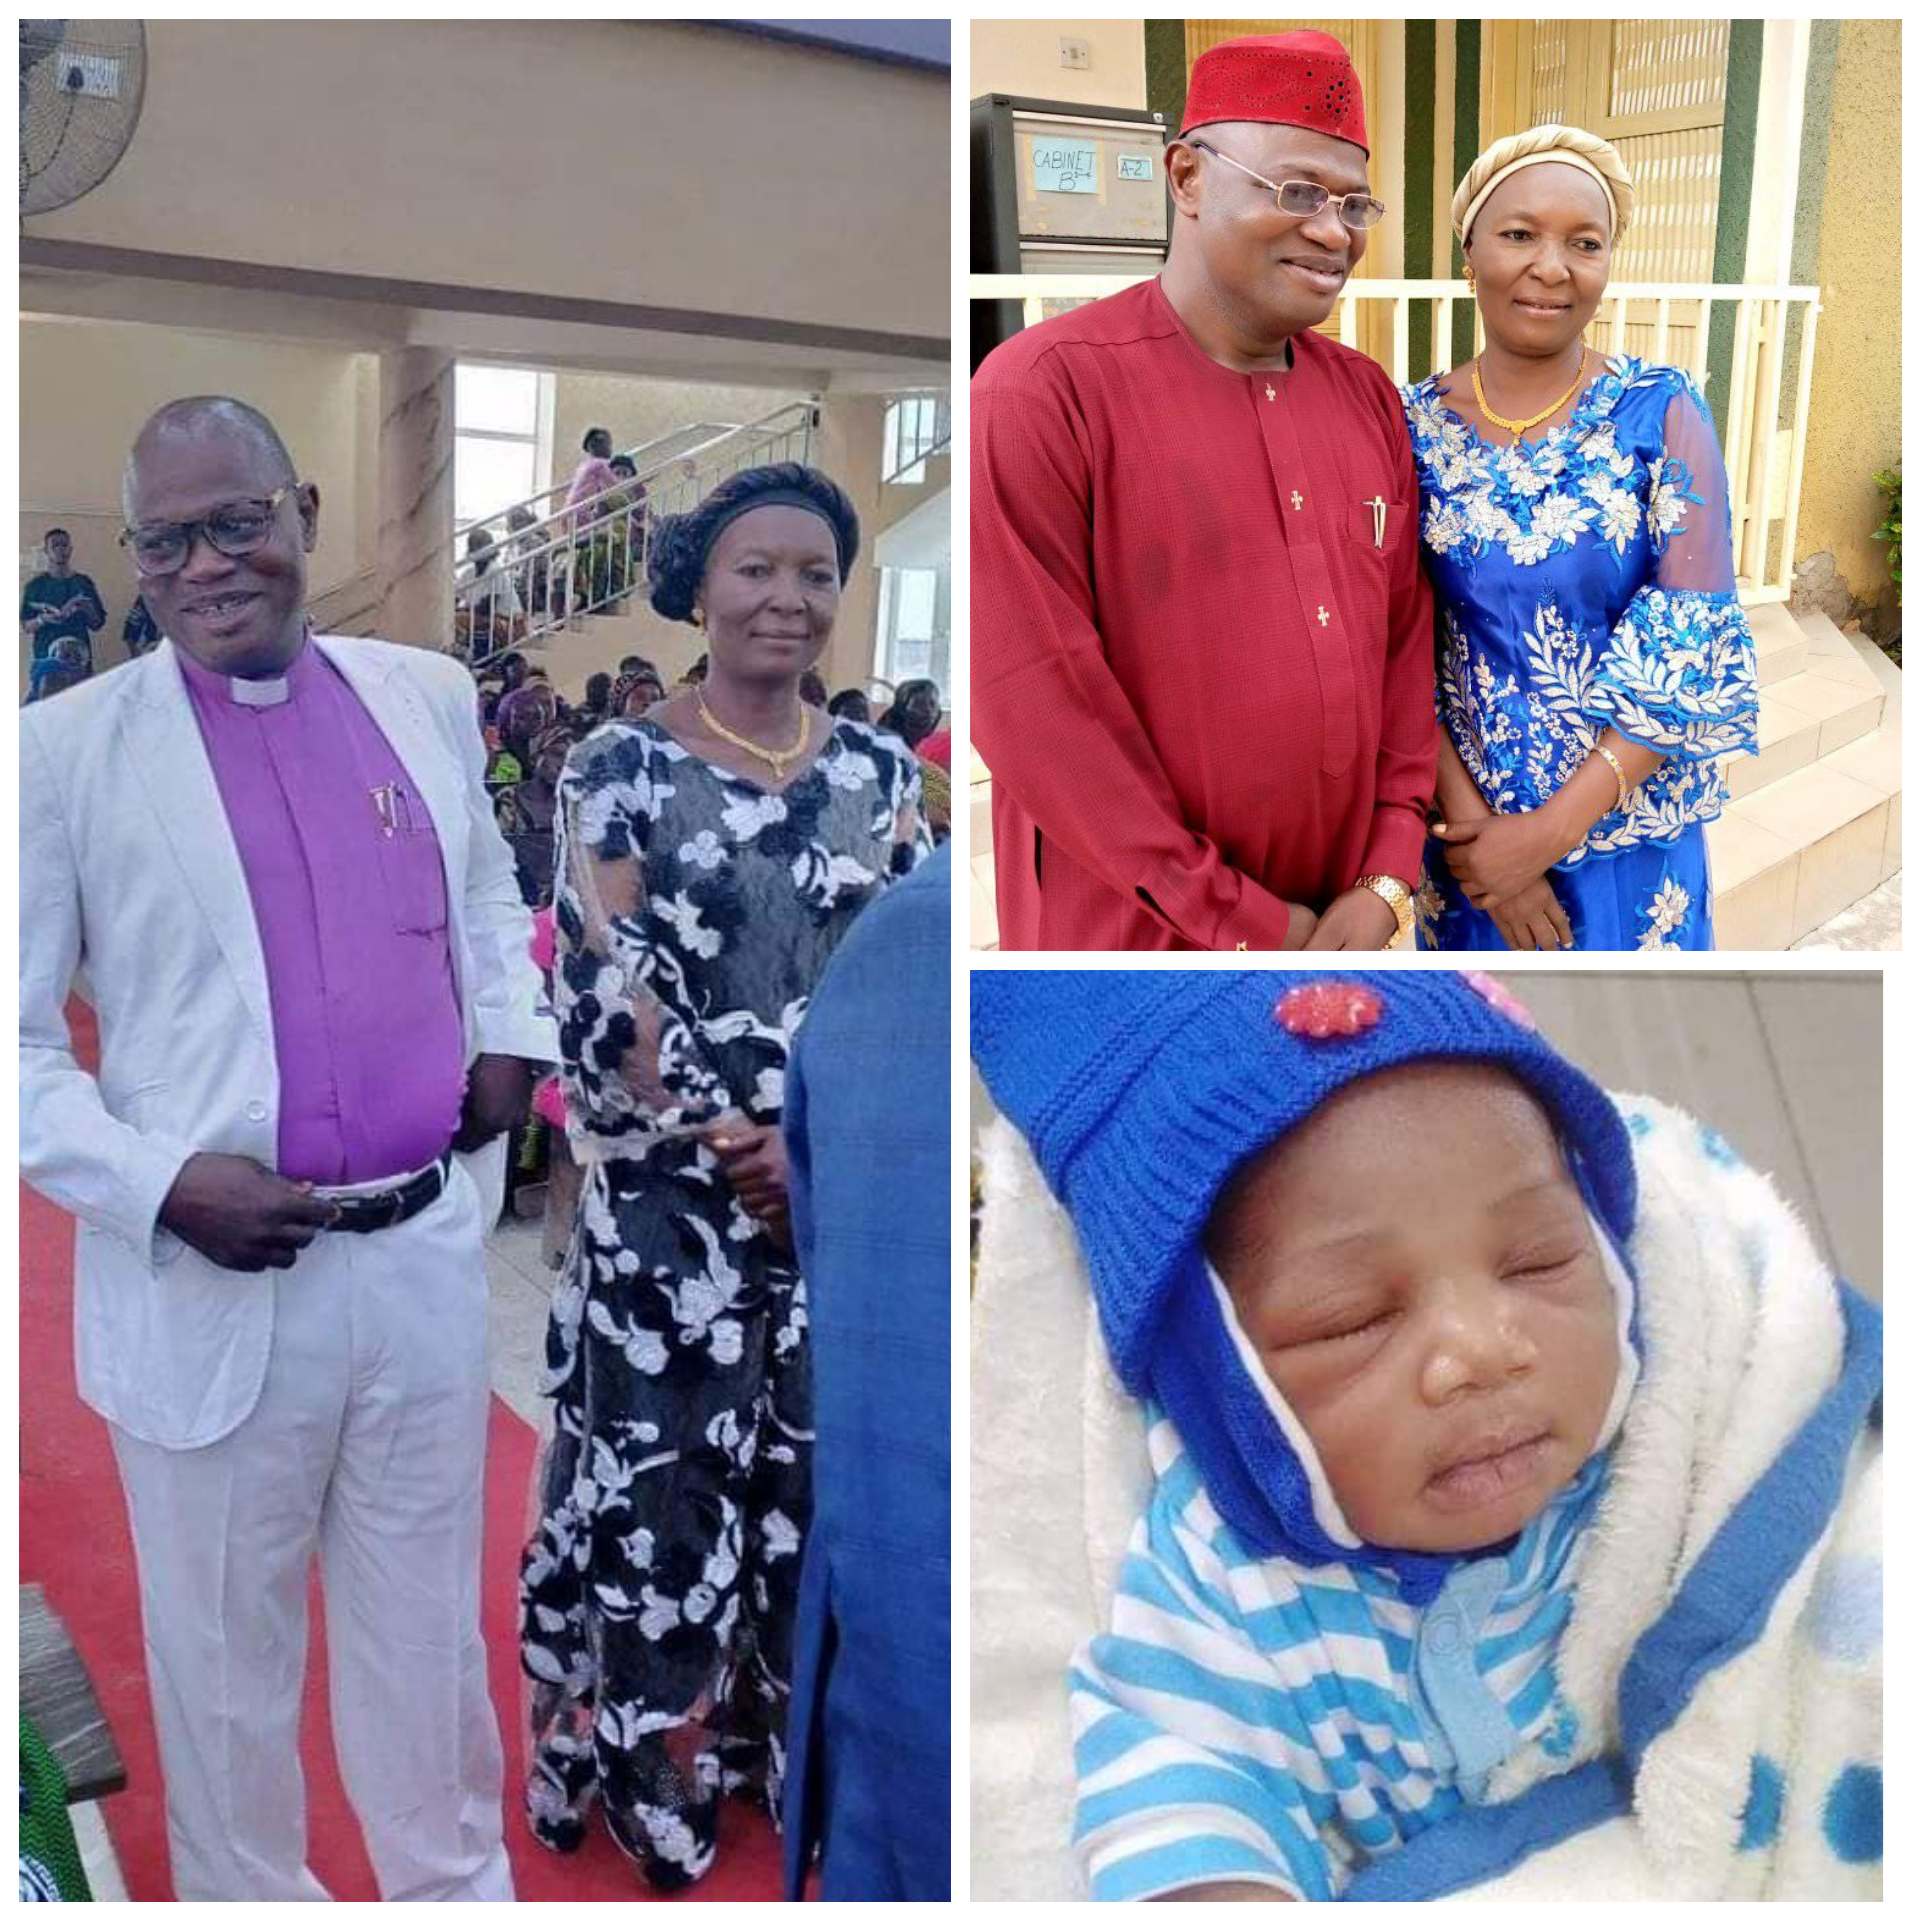 NIGERIAN CLERIC AND HIS WIFE WELCOME FIRST CHILD AFTER 35 YEARS OF WAITING